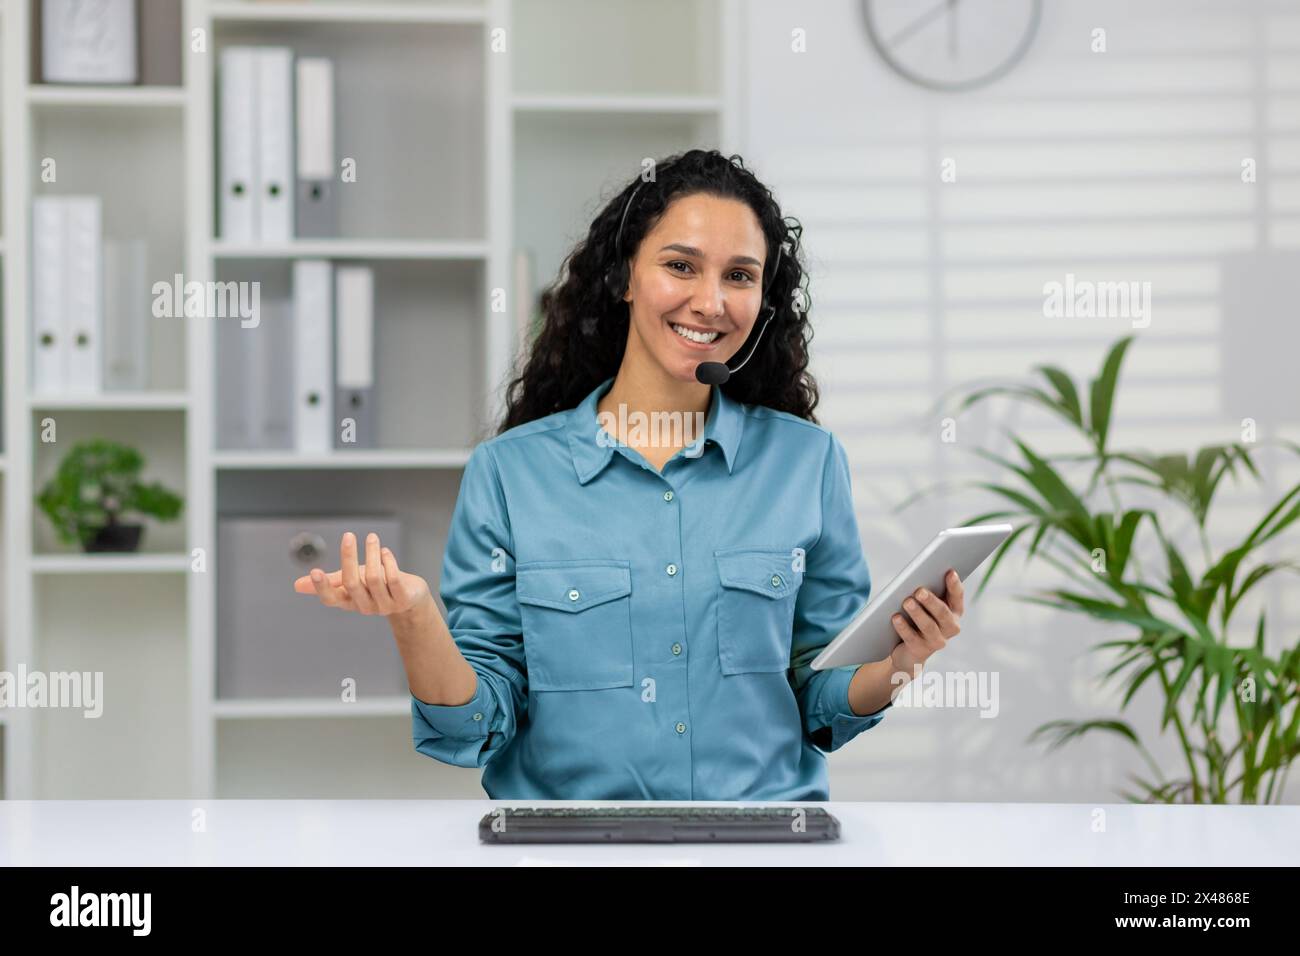 A smiling woman in a blue shirt wearing a headset works as a customer service representative. She gestures openly with a tablet in her hand, in a brig Stock Photo